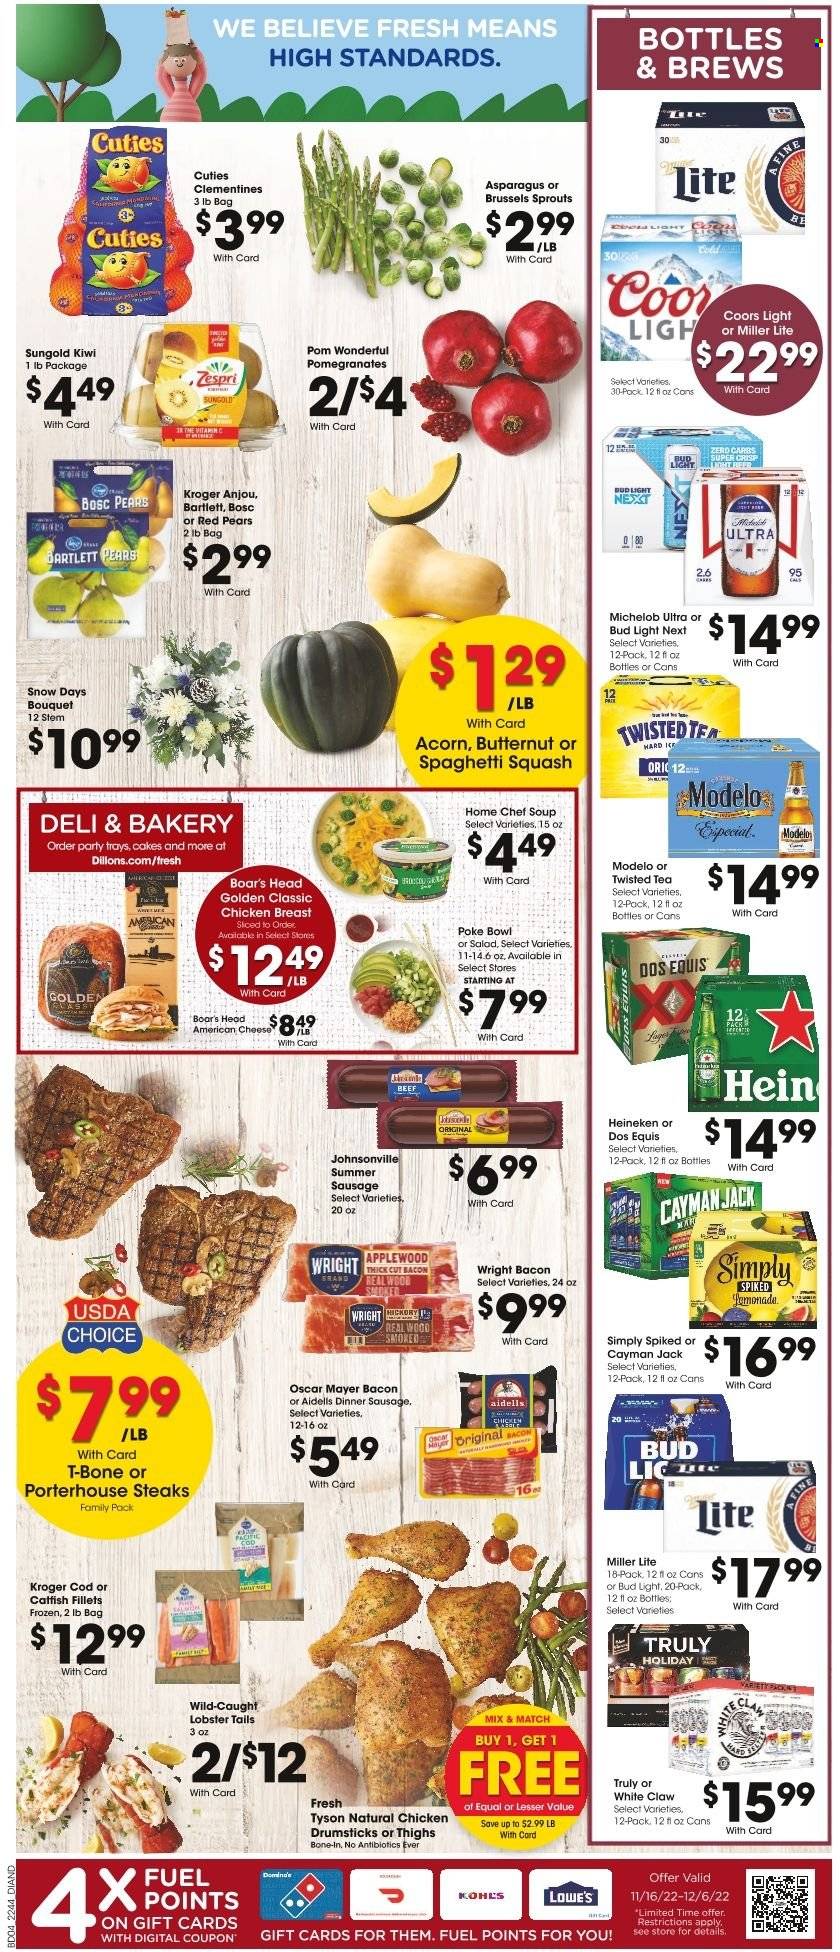 thumbnail - Dillons Flyer - 11/30/2022 - 12/06/2022 - Sales products - cake, asparagus, brussel sprouts, Bartlett pears, kiwi, pears, catfish, cod, lobster, lobster tail, soup, bacon, Johnsonville, Oscar Mayer, sausage, summer sausage, american cheese, cheese, tea, White Claw, TRULY, beer, Bud Light, Heineken, Lager, Modelo, chicken breasts, chicken drumsticks, beef meat, t-bone steak, steak, portehouse steak, bowl, bouquet, butternut squash, clementines, Miller Lite, Coors, Dos Equis, Twisted Tea, Michelob, pomegranate. Page 5.